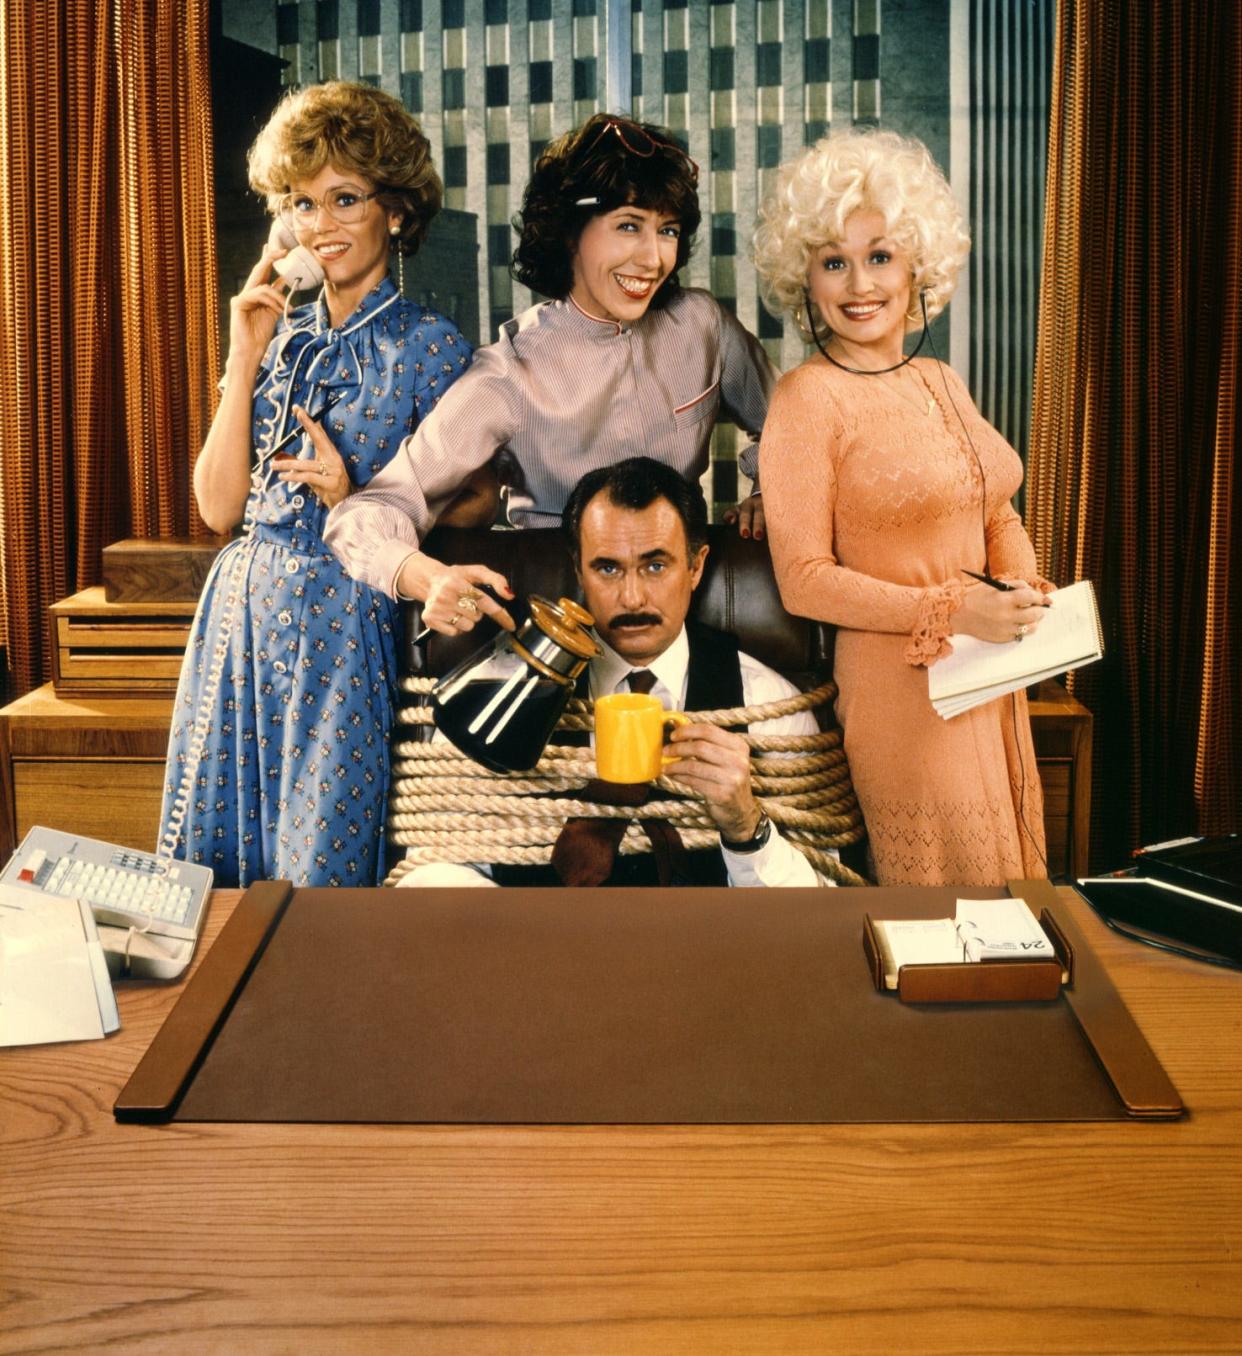 Jane Fonda, Lily Tomlin, Dolly Parton and Dabney Coleman starred in the workplace comedy "9 to 5," released in 1980.